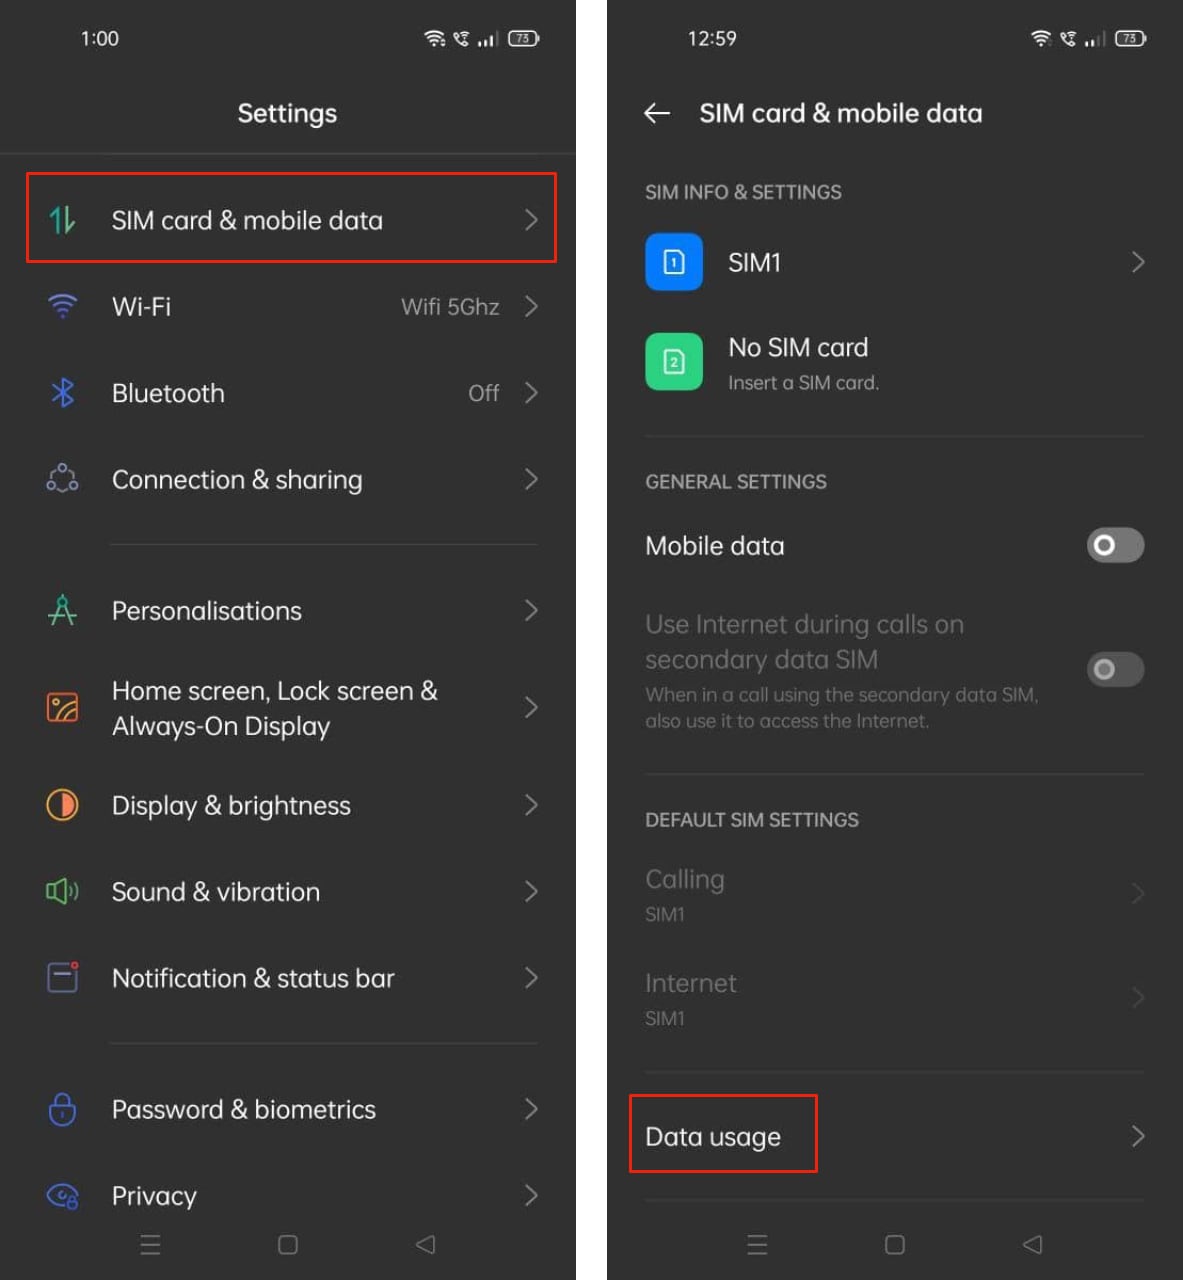 Open Settings on your Realme phone